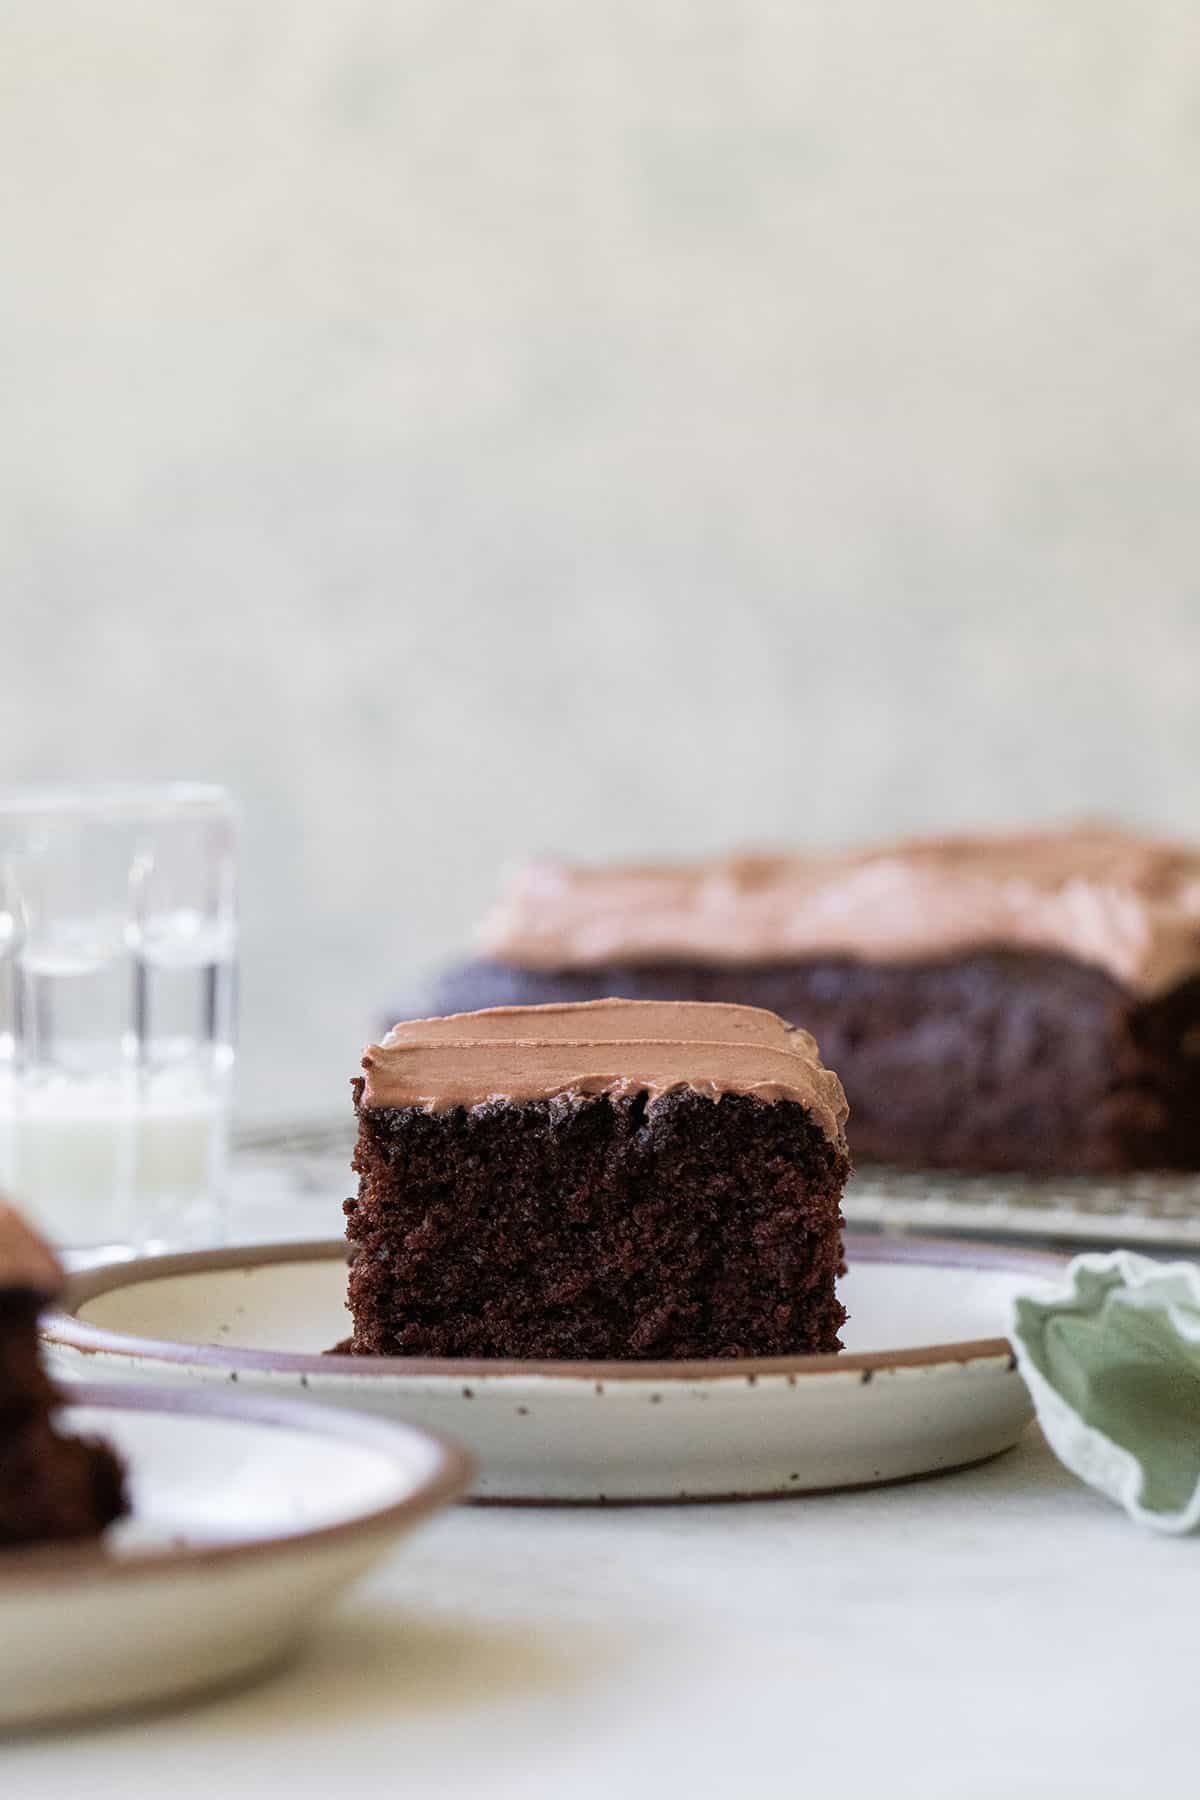 The perfect slice of homemade chocolate cake with chocolate frosting.